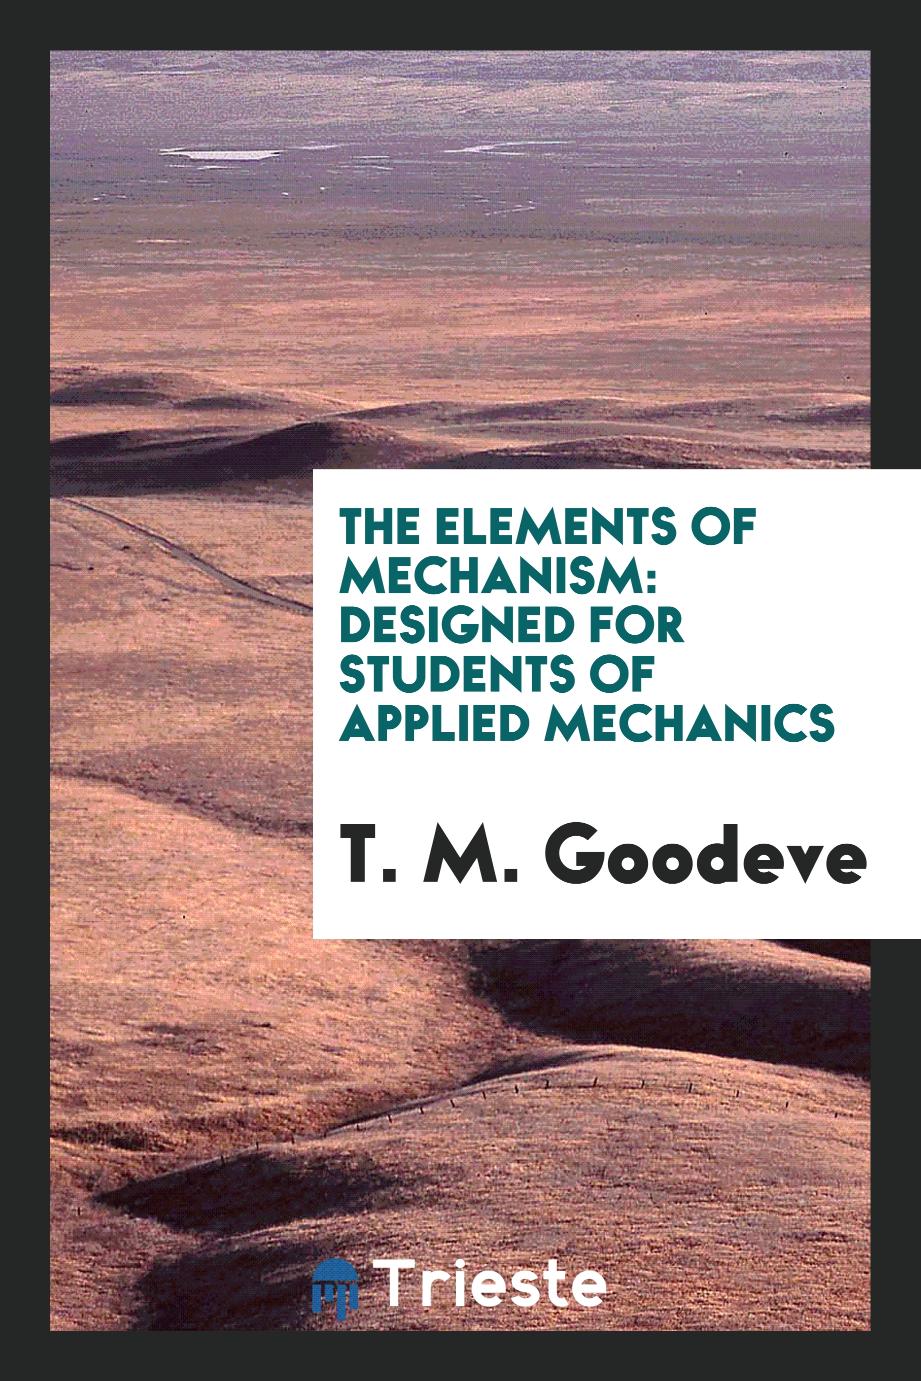 The Elements of Mechanism: Designed for Students of Applied Mechanics